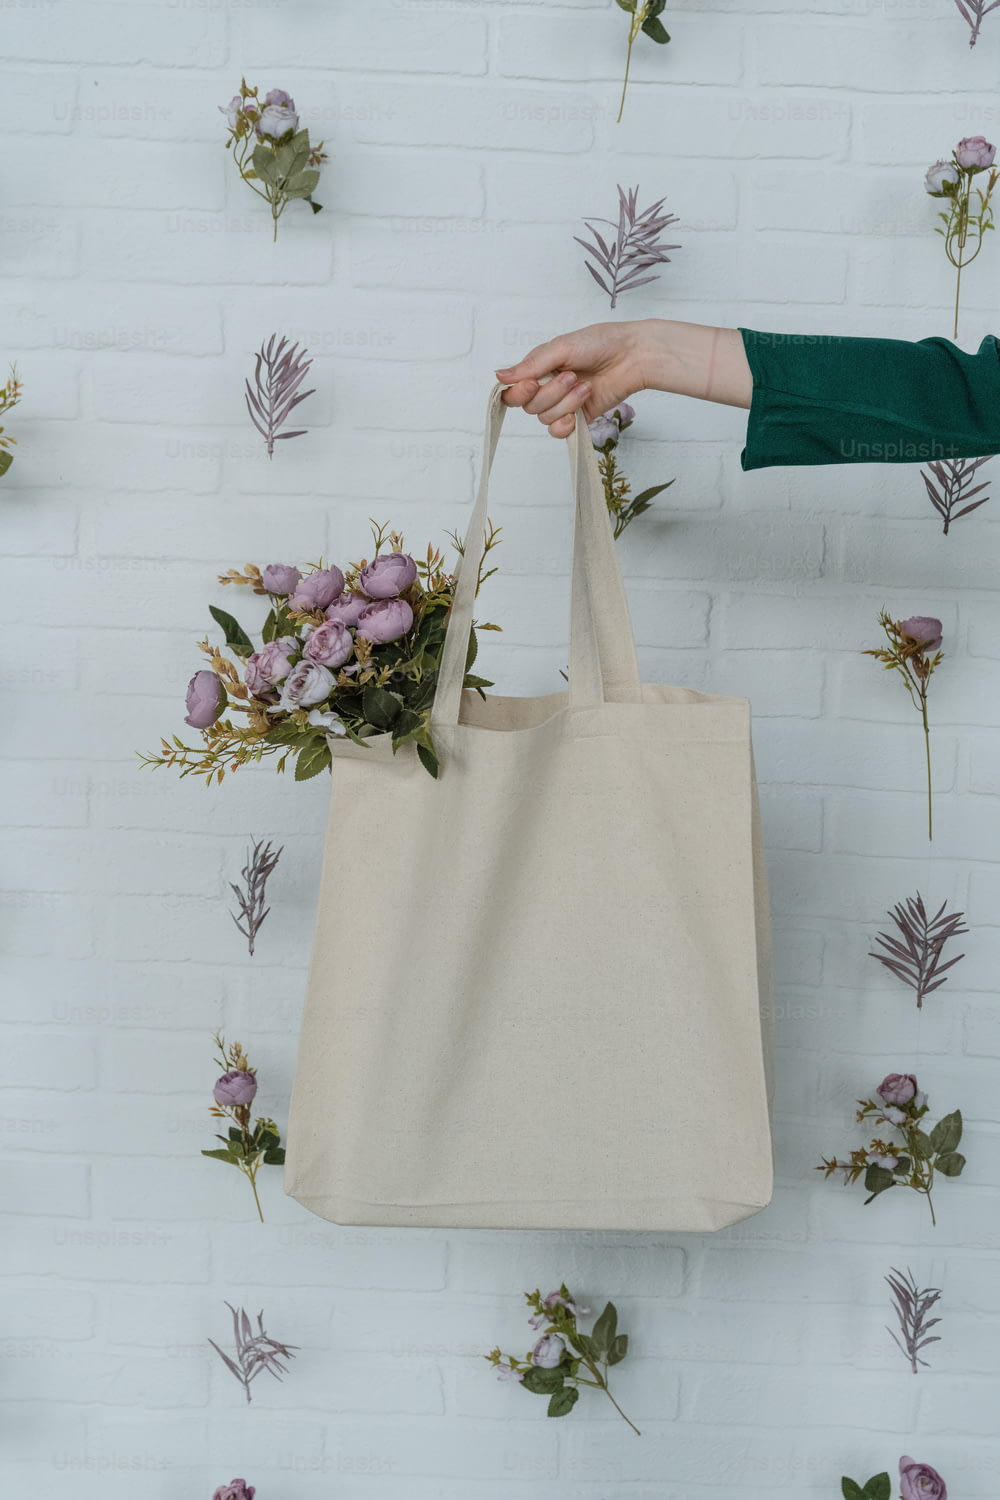 a person holding a bag with flowers on it